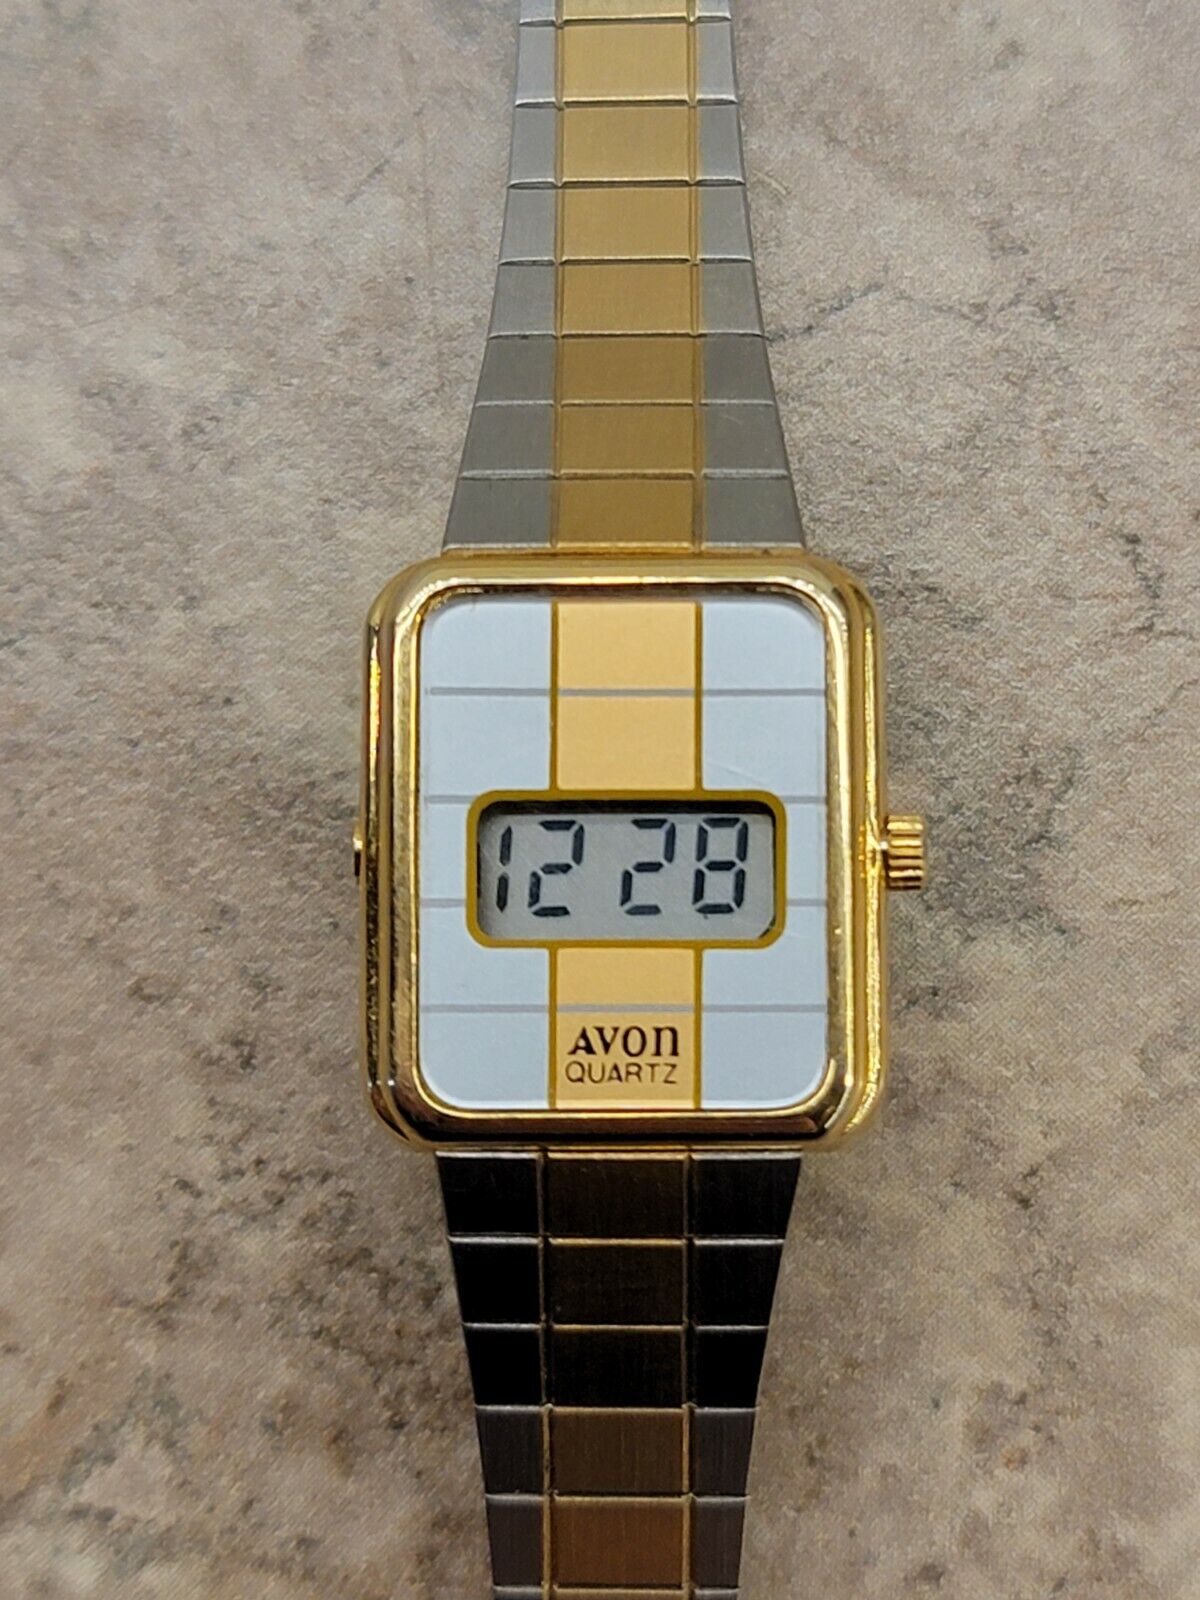 Avon “You’re Beautiful” Quartz LCD Ladies Watch 2-Tone Stainless Excellent Cond.